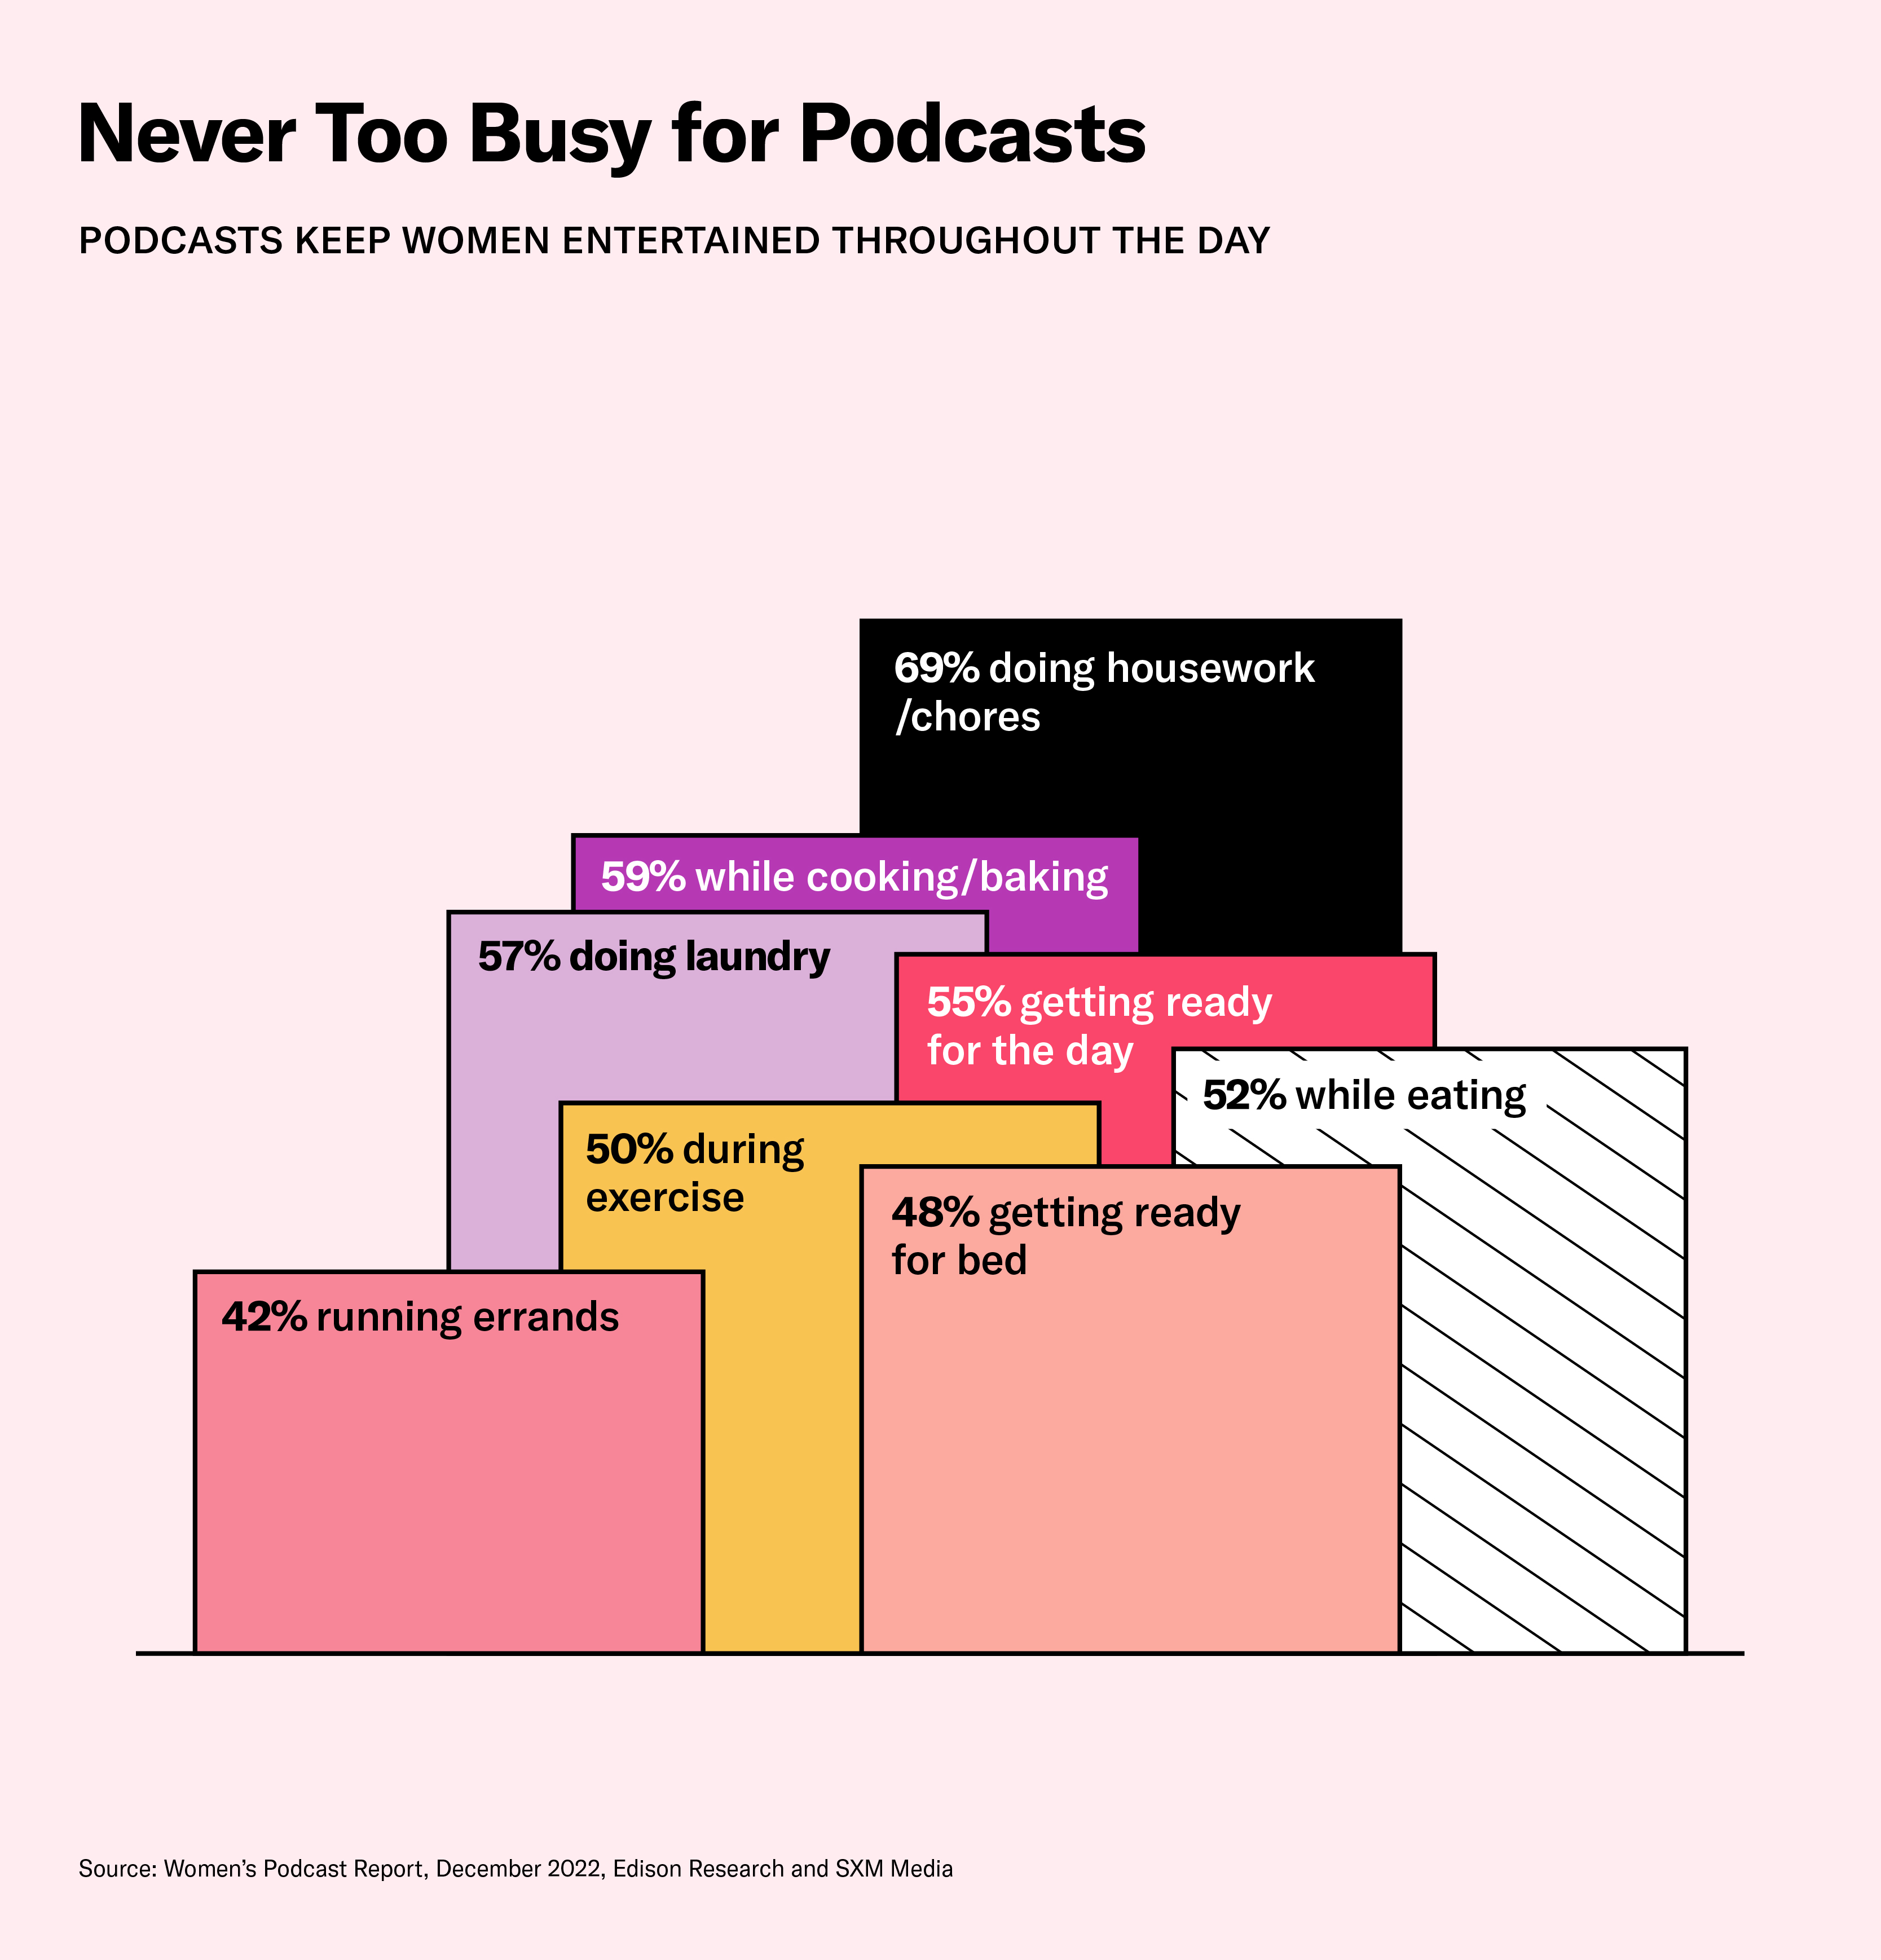 Never too busy for podcasts